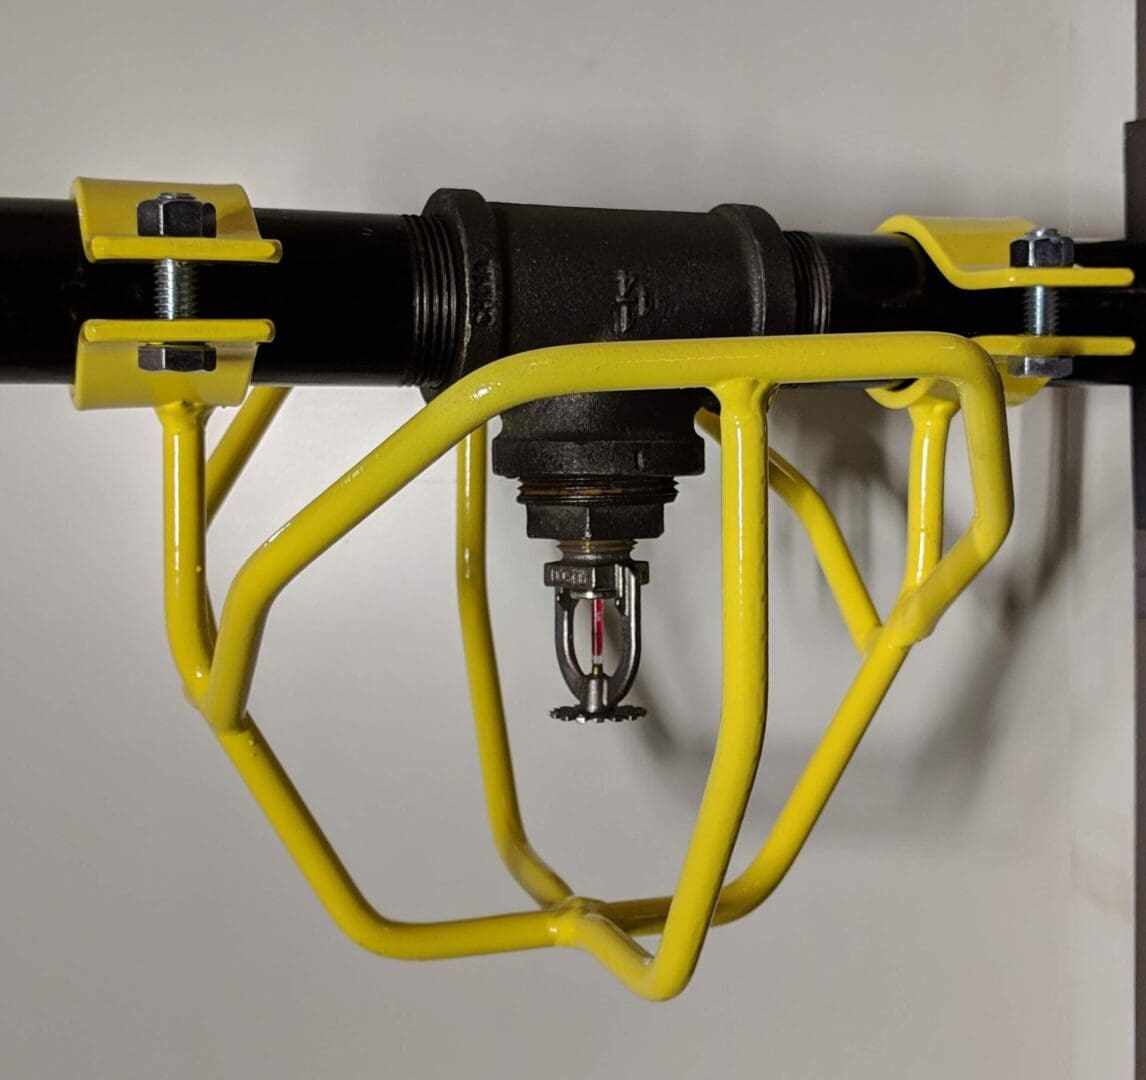 Heavy Duty Industrial Sprinkler Guards available in Black, Red, Yellow, and White powder coat finish.